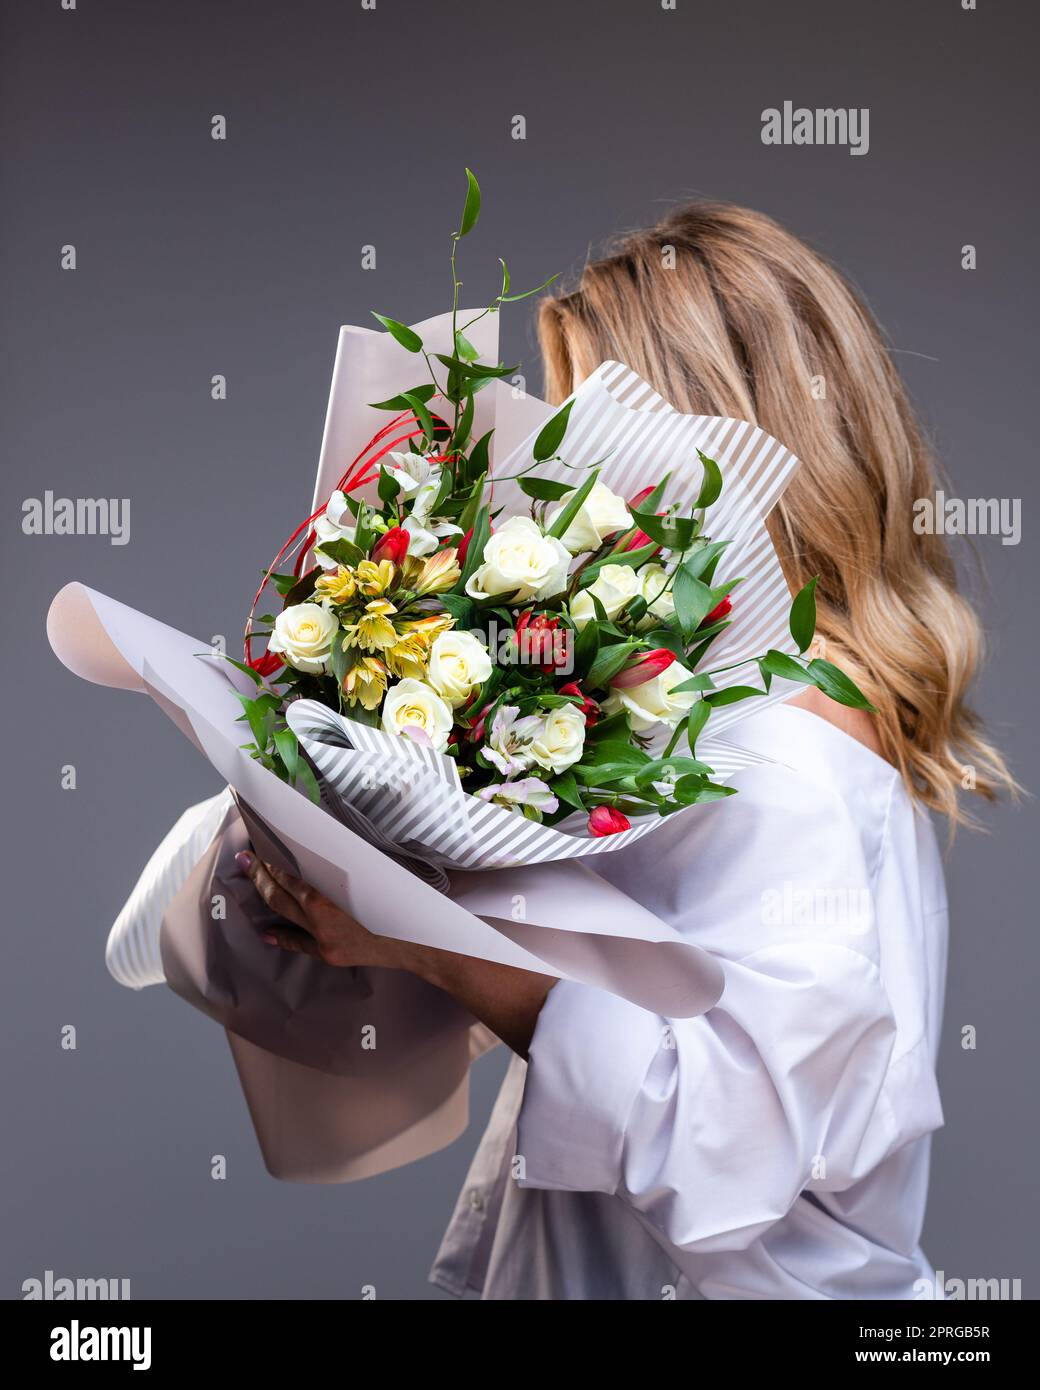 Woman in a white shirt holds a bouquet of flowers with roses, tulips and greenery. Stock Photo